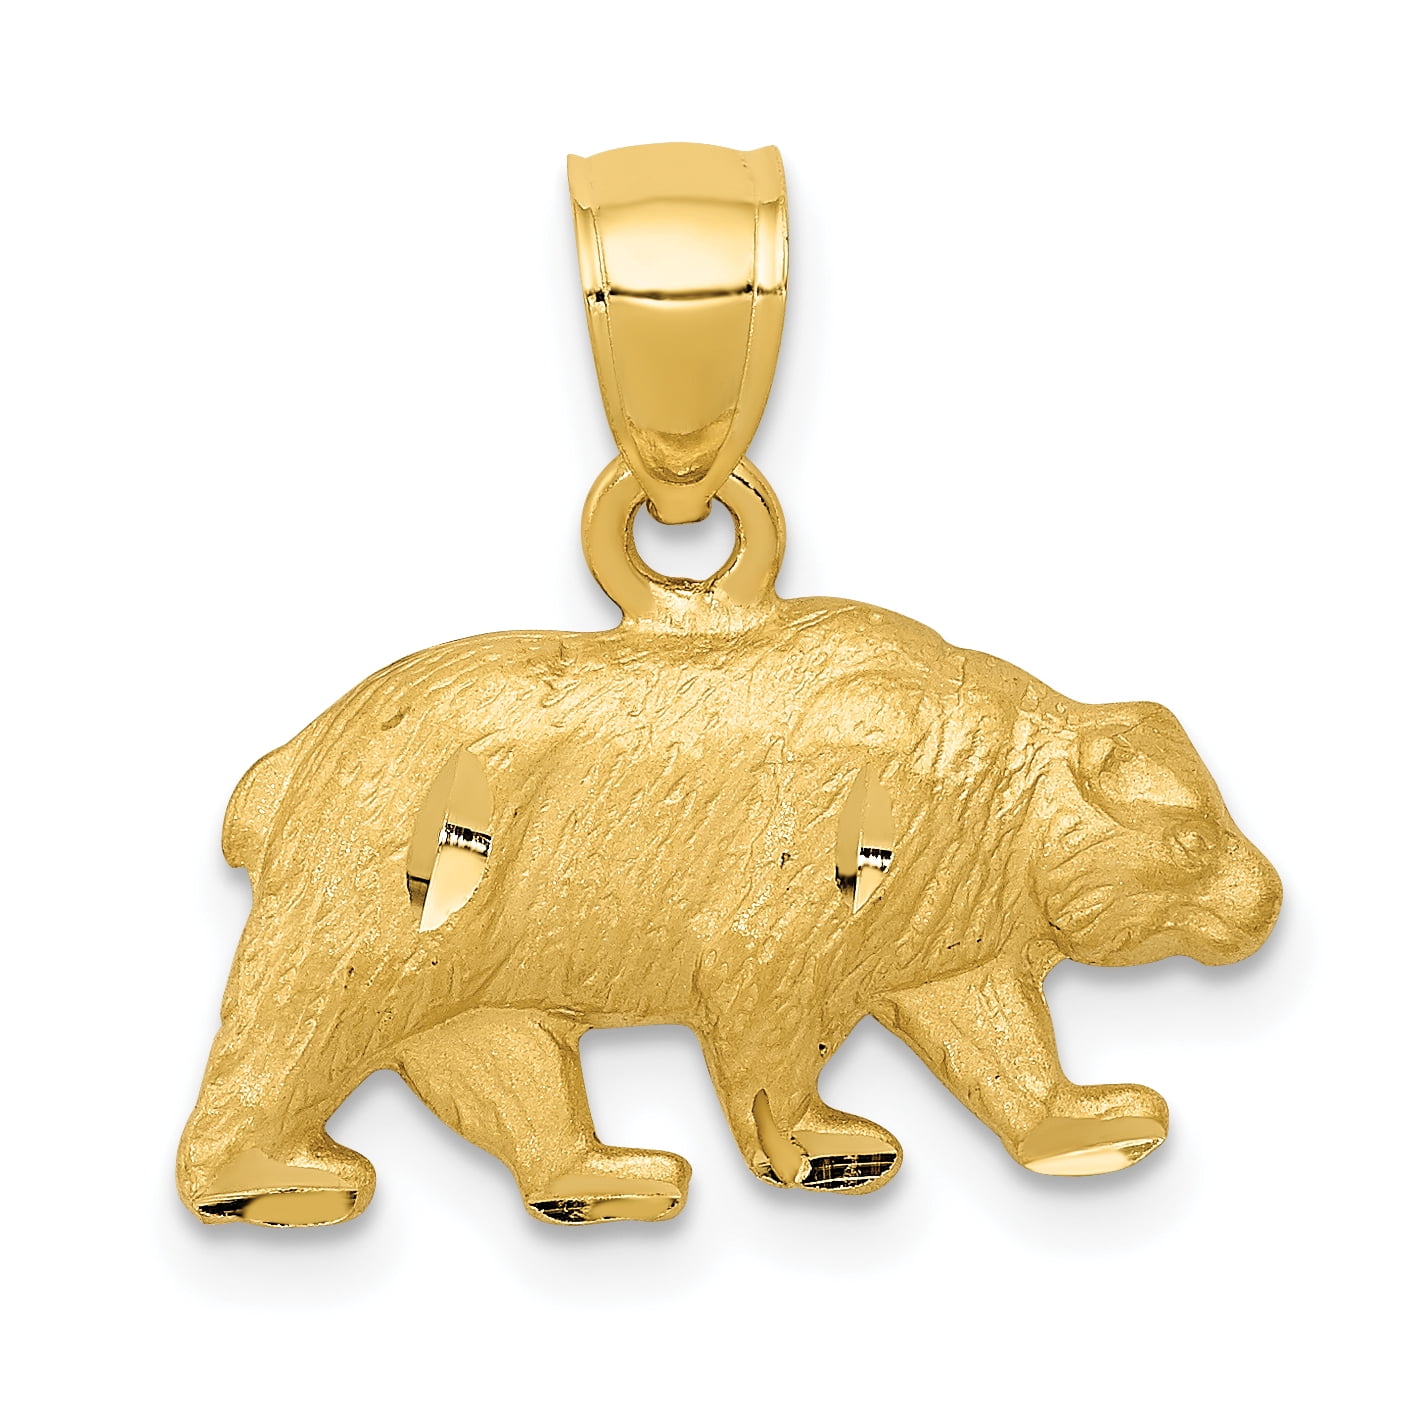 Bear and cub pendant with gold, white and chocolate diamonds